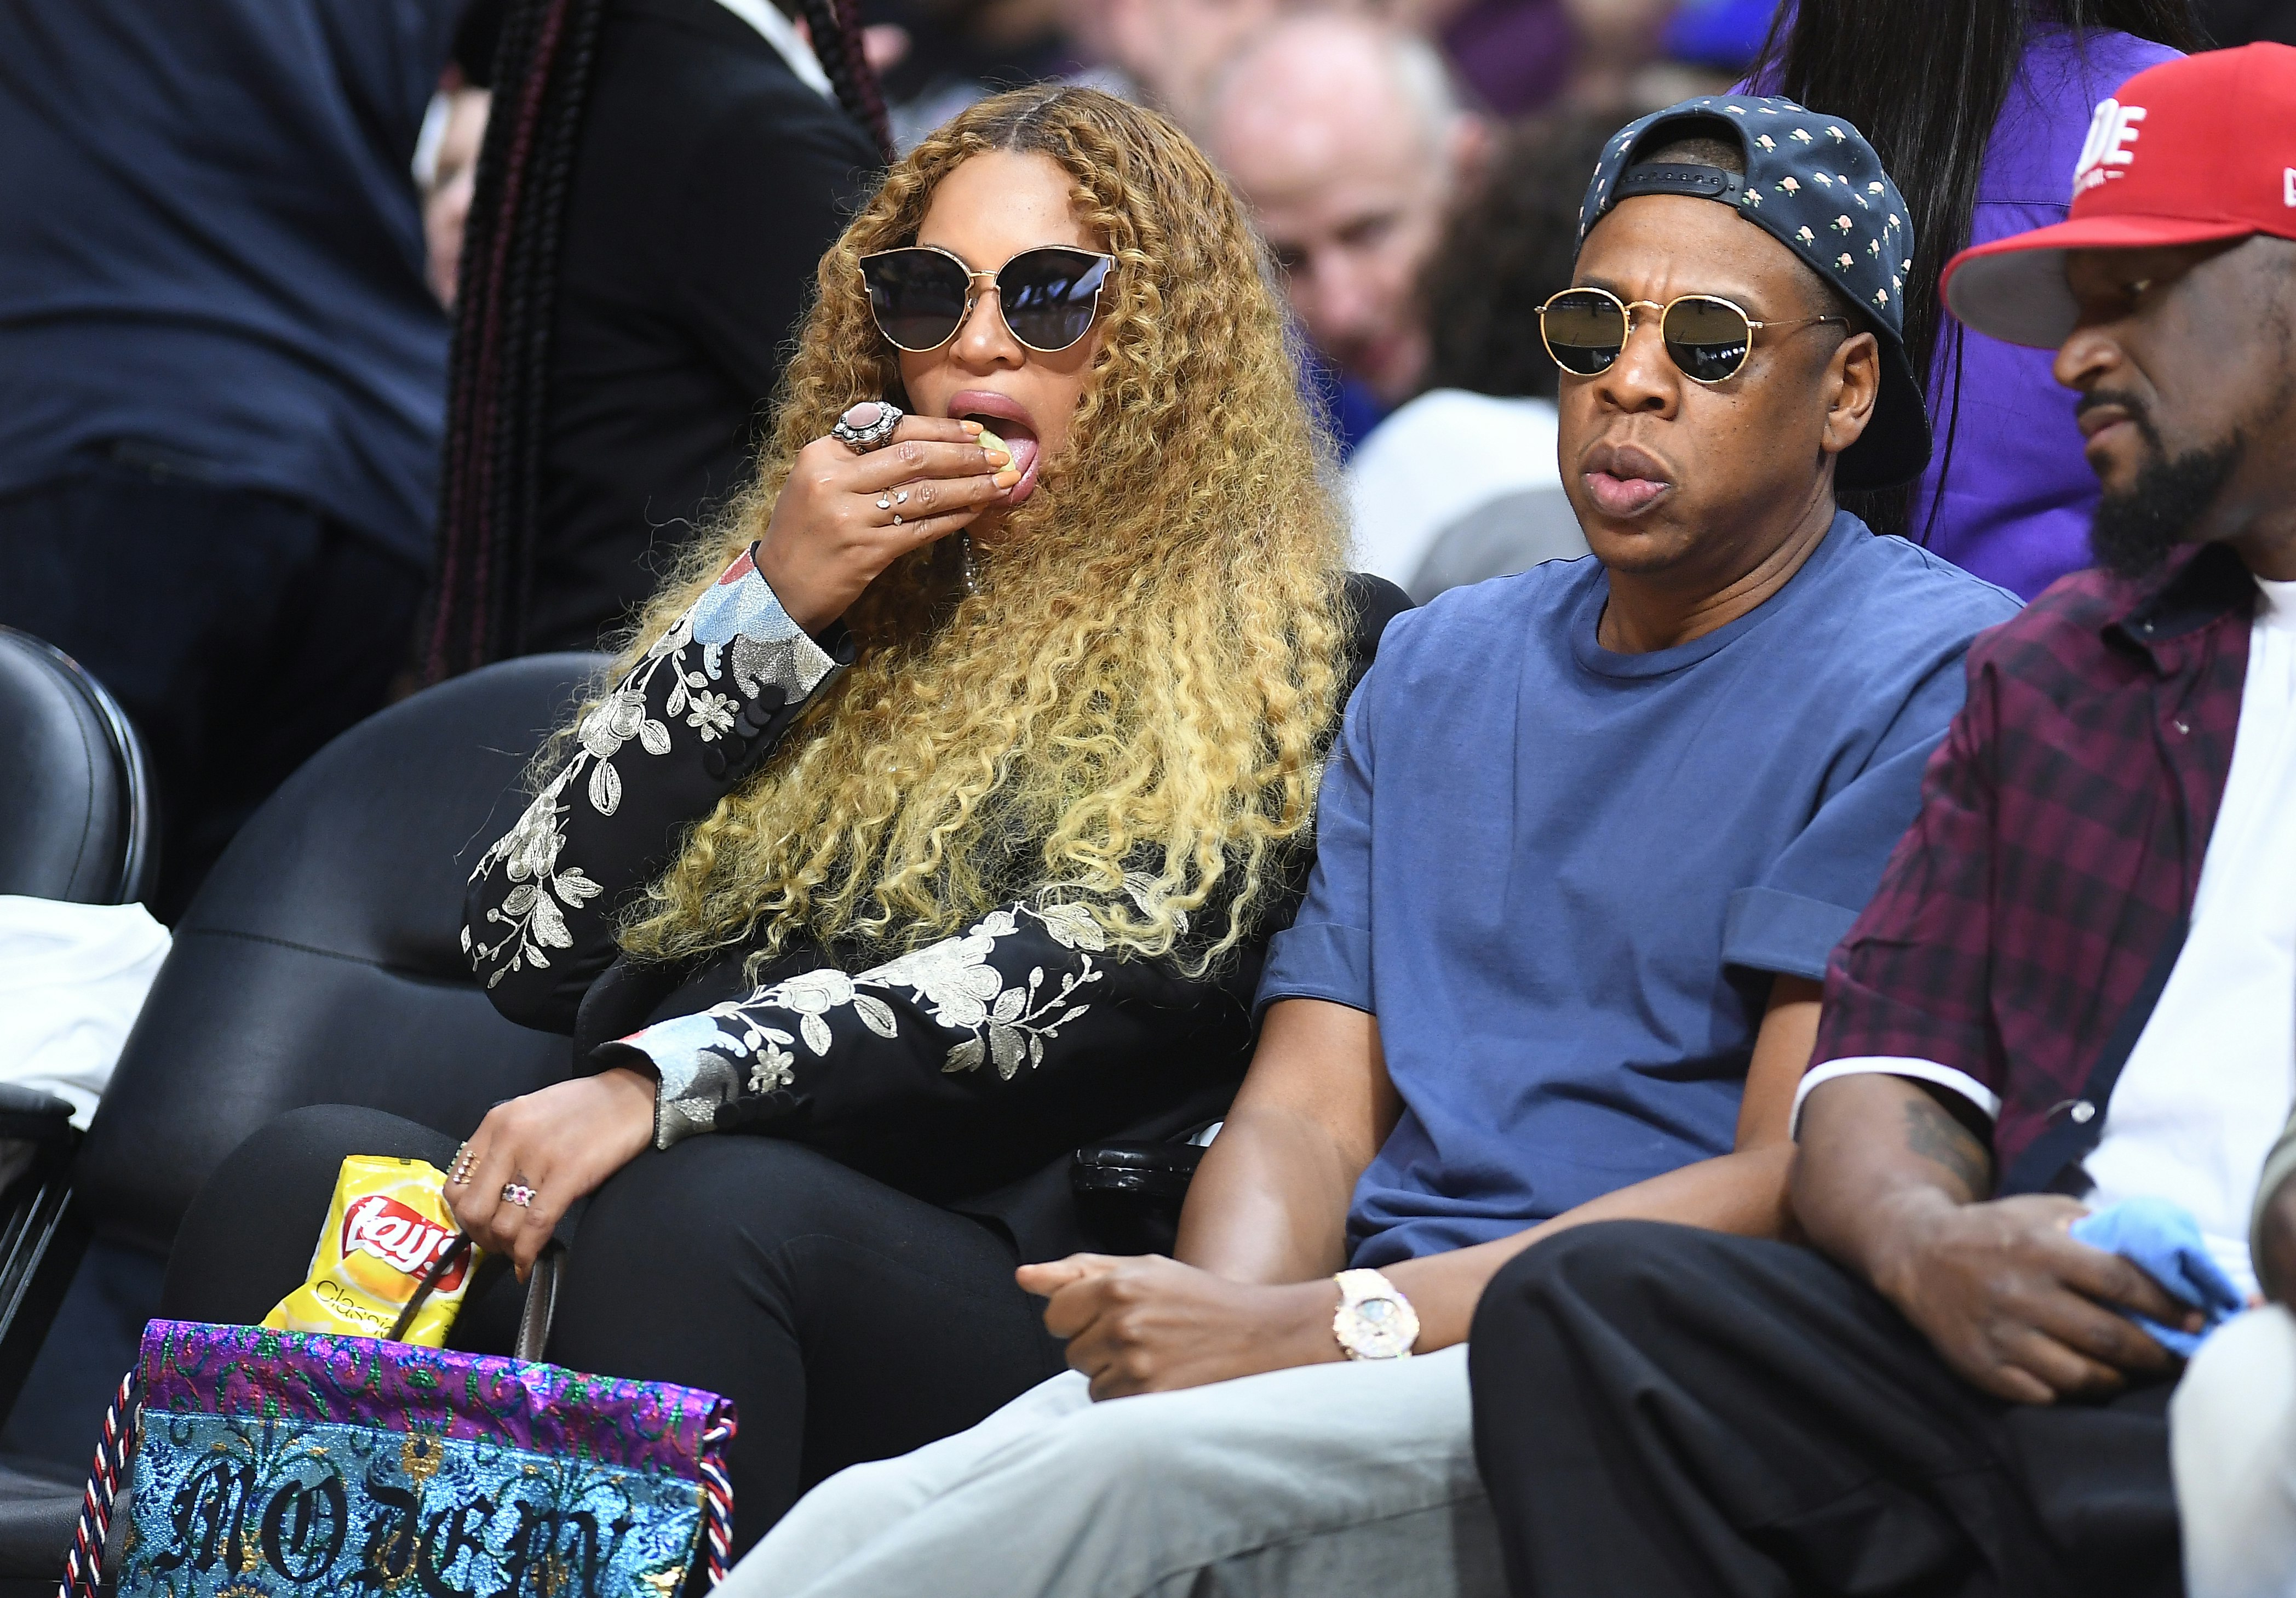 Beyonce eating snacks, sitting courtside with Jay Z at an NBA game